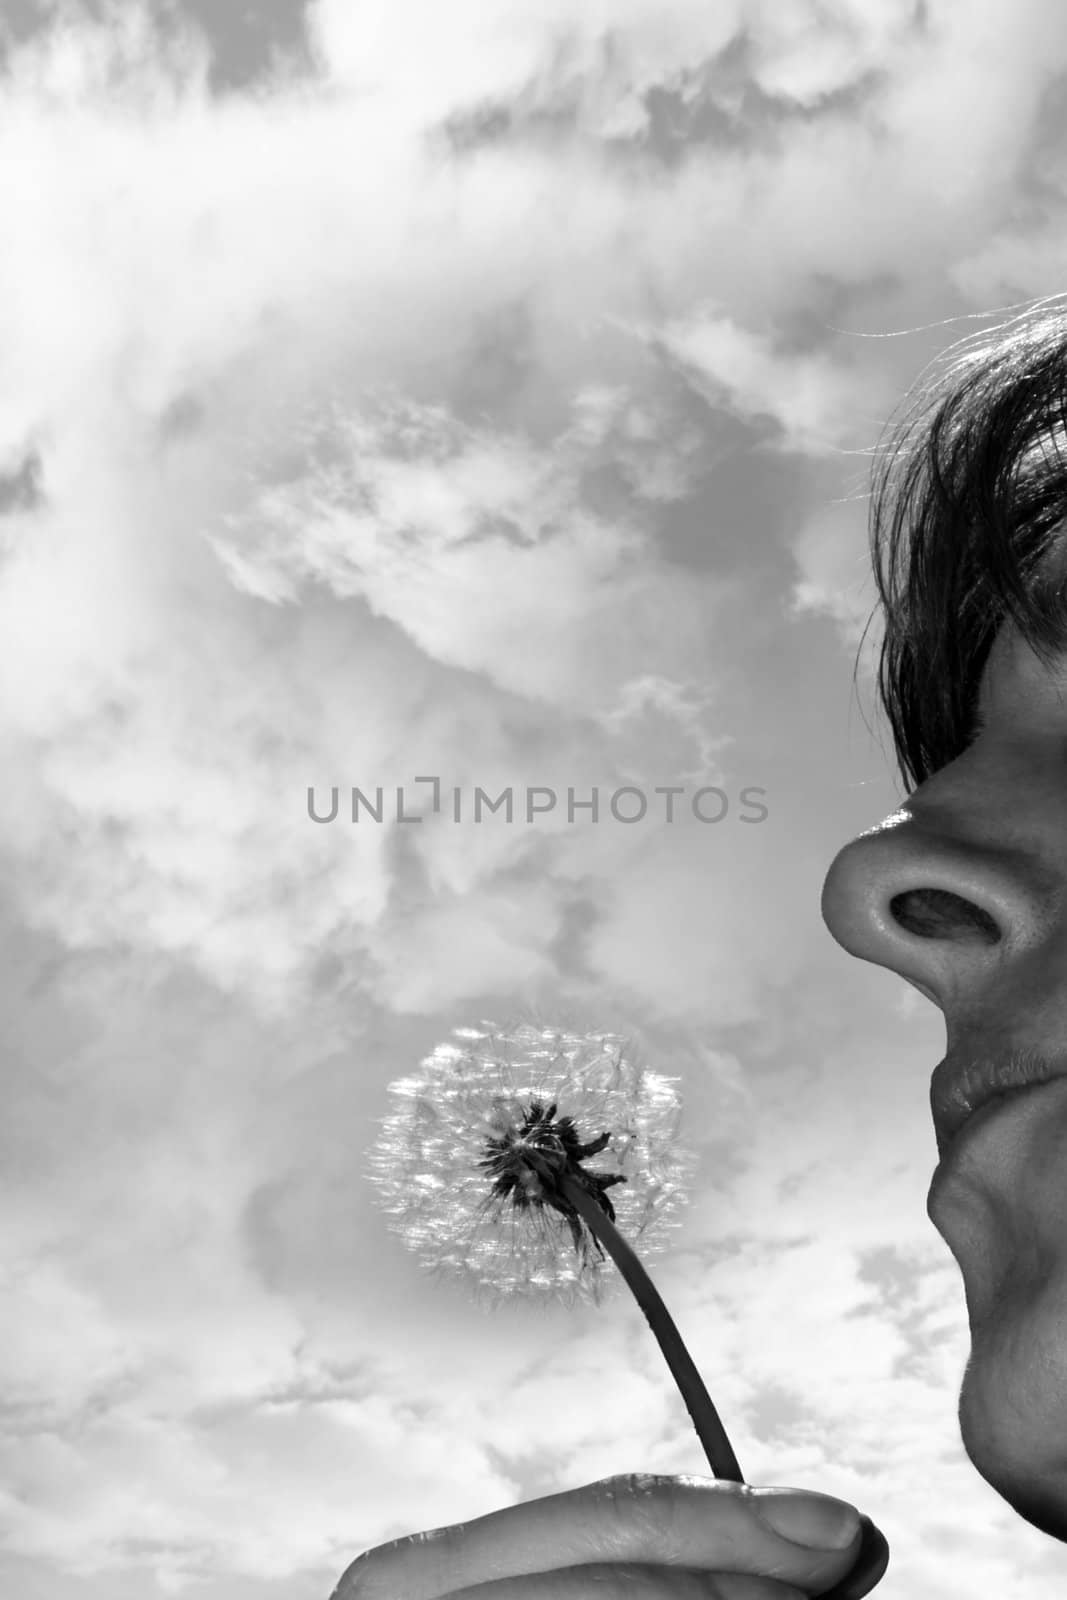 a beautiful dandelion being gently blown by a middle aged woman in a garden against a cloudy sky in black and white